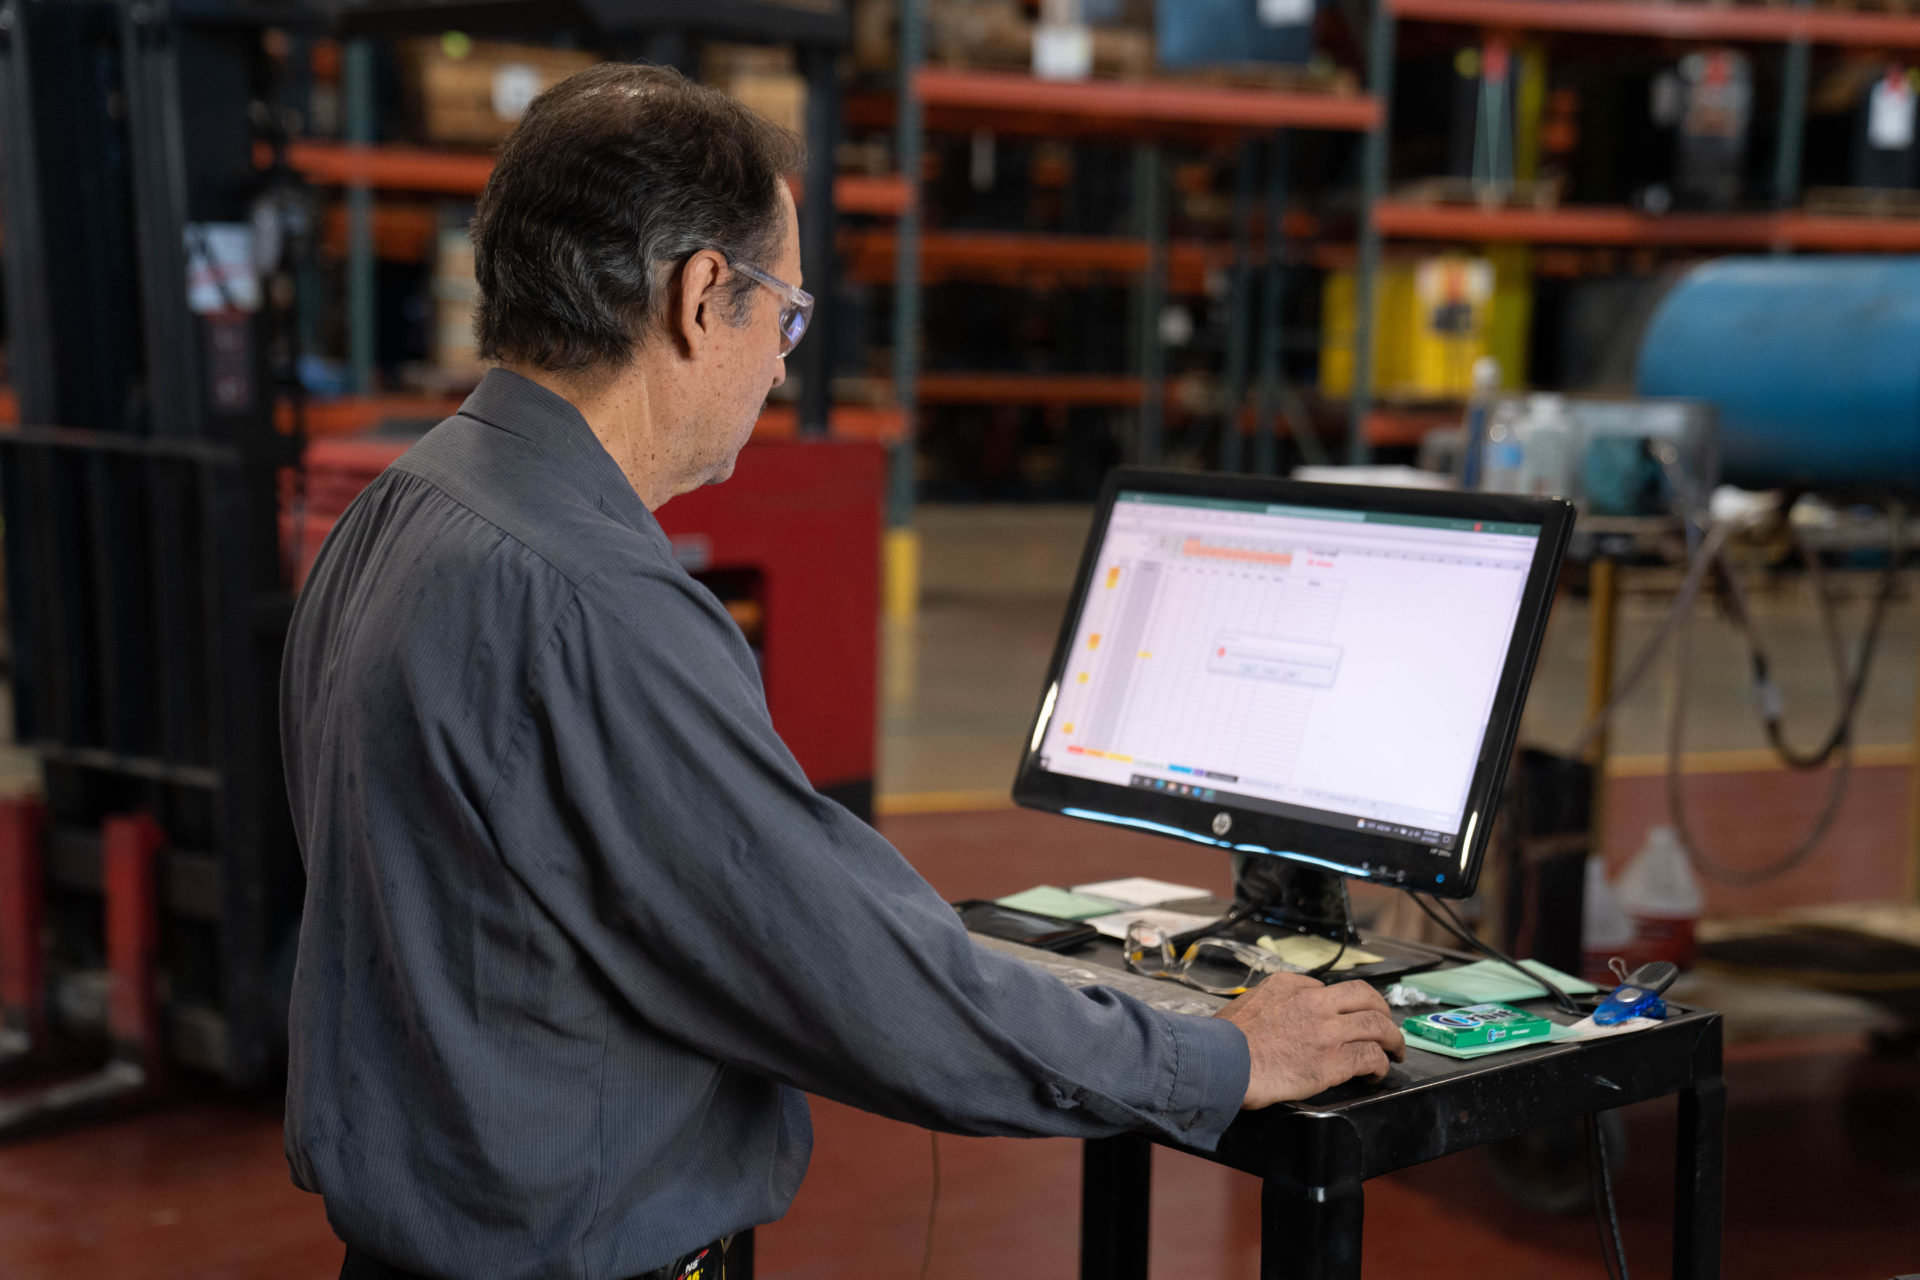 IBP's power management program provides battery data, which a man reviews on a computer screen